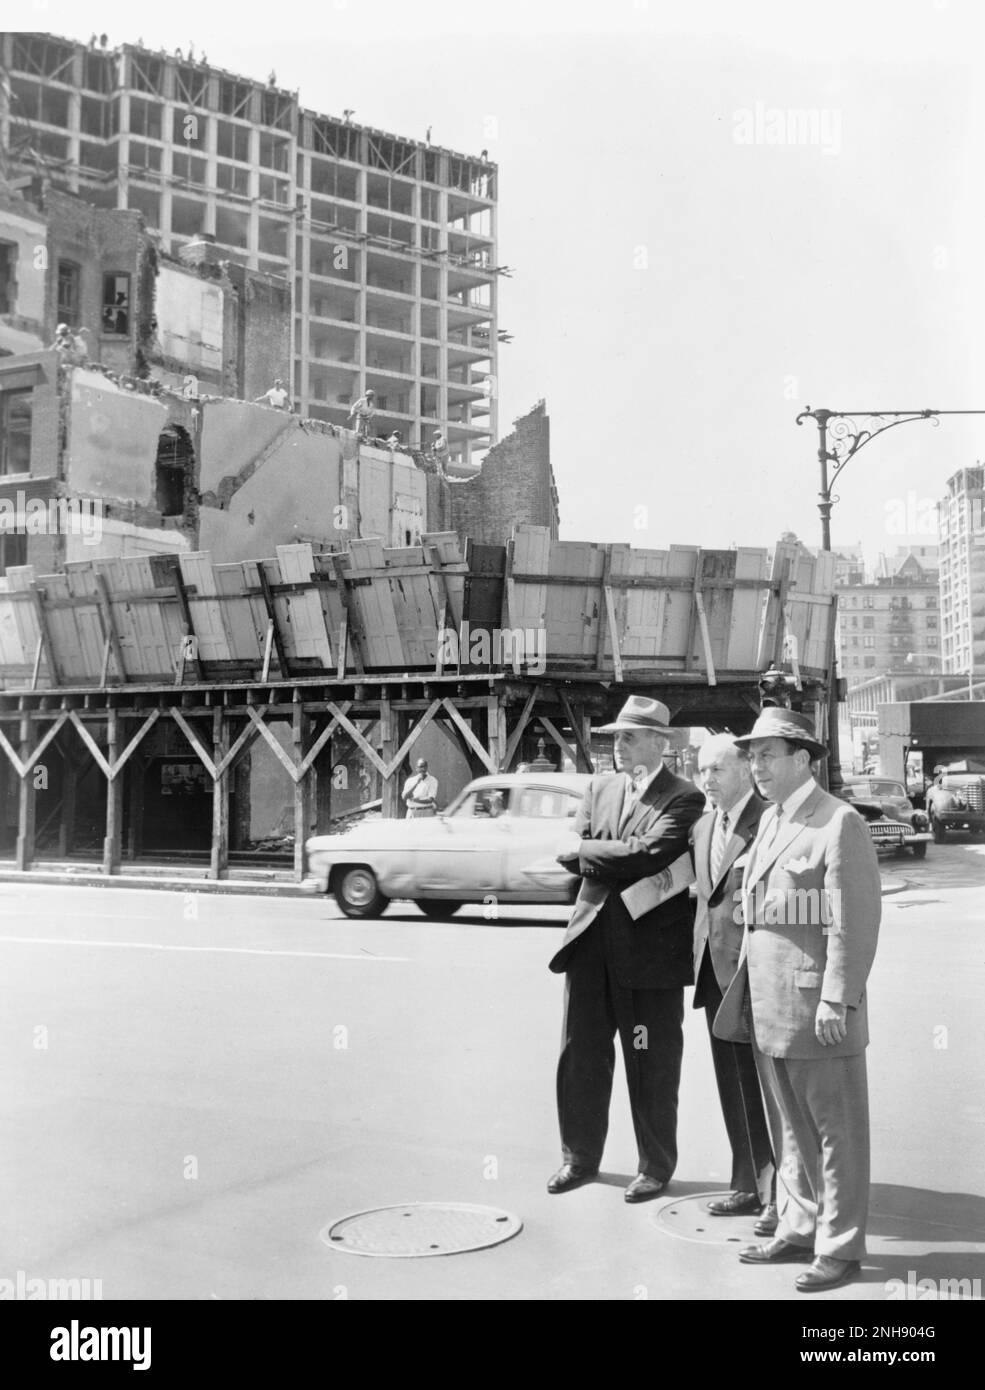 New York City Mayor Robert Wagner (r) joined by Robert Moses (l) and Frank Meistrell (c) on a housing project tour in New York City. Photographed by Walter Albertin, August 9th, 1956. Stock Photo